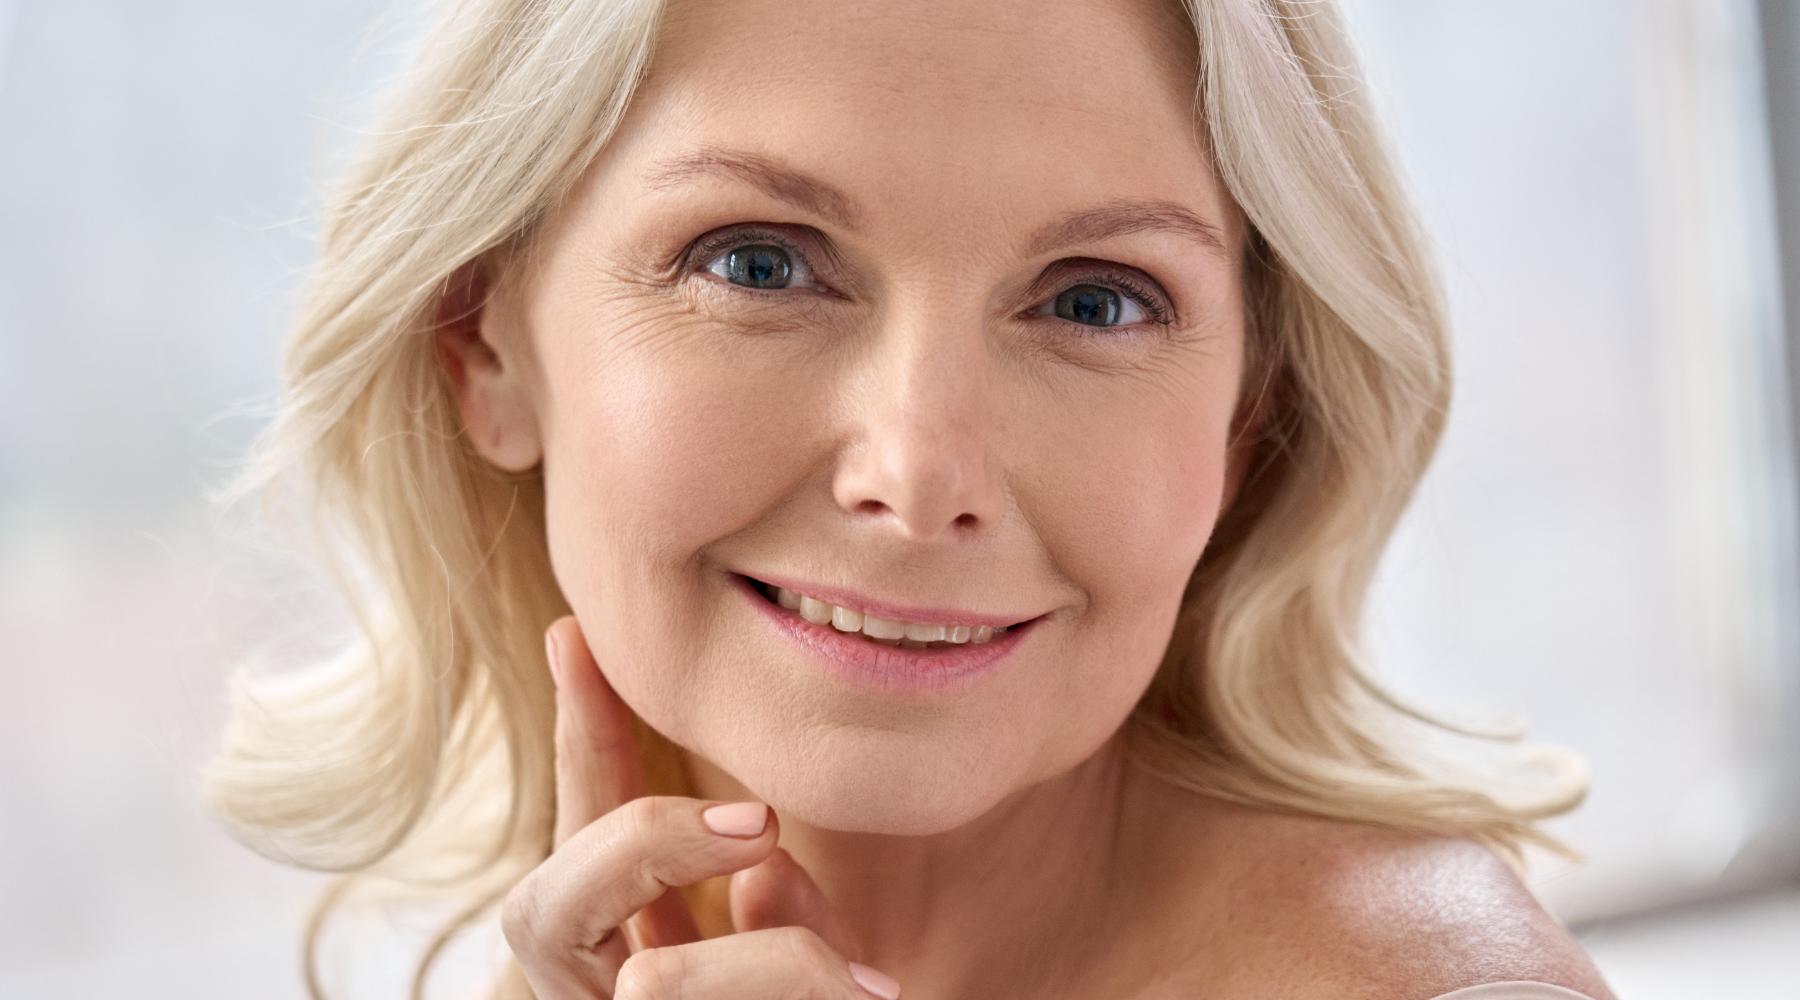 5 Skincare Recommendations for Aging Skin